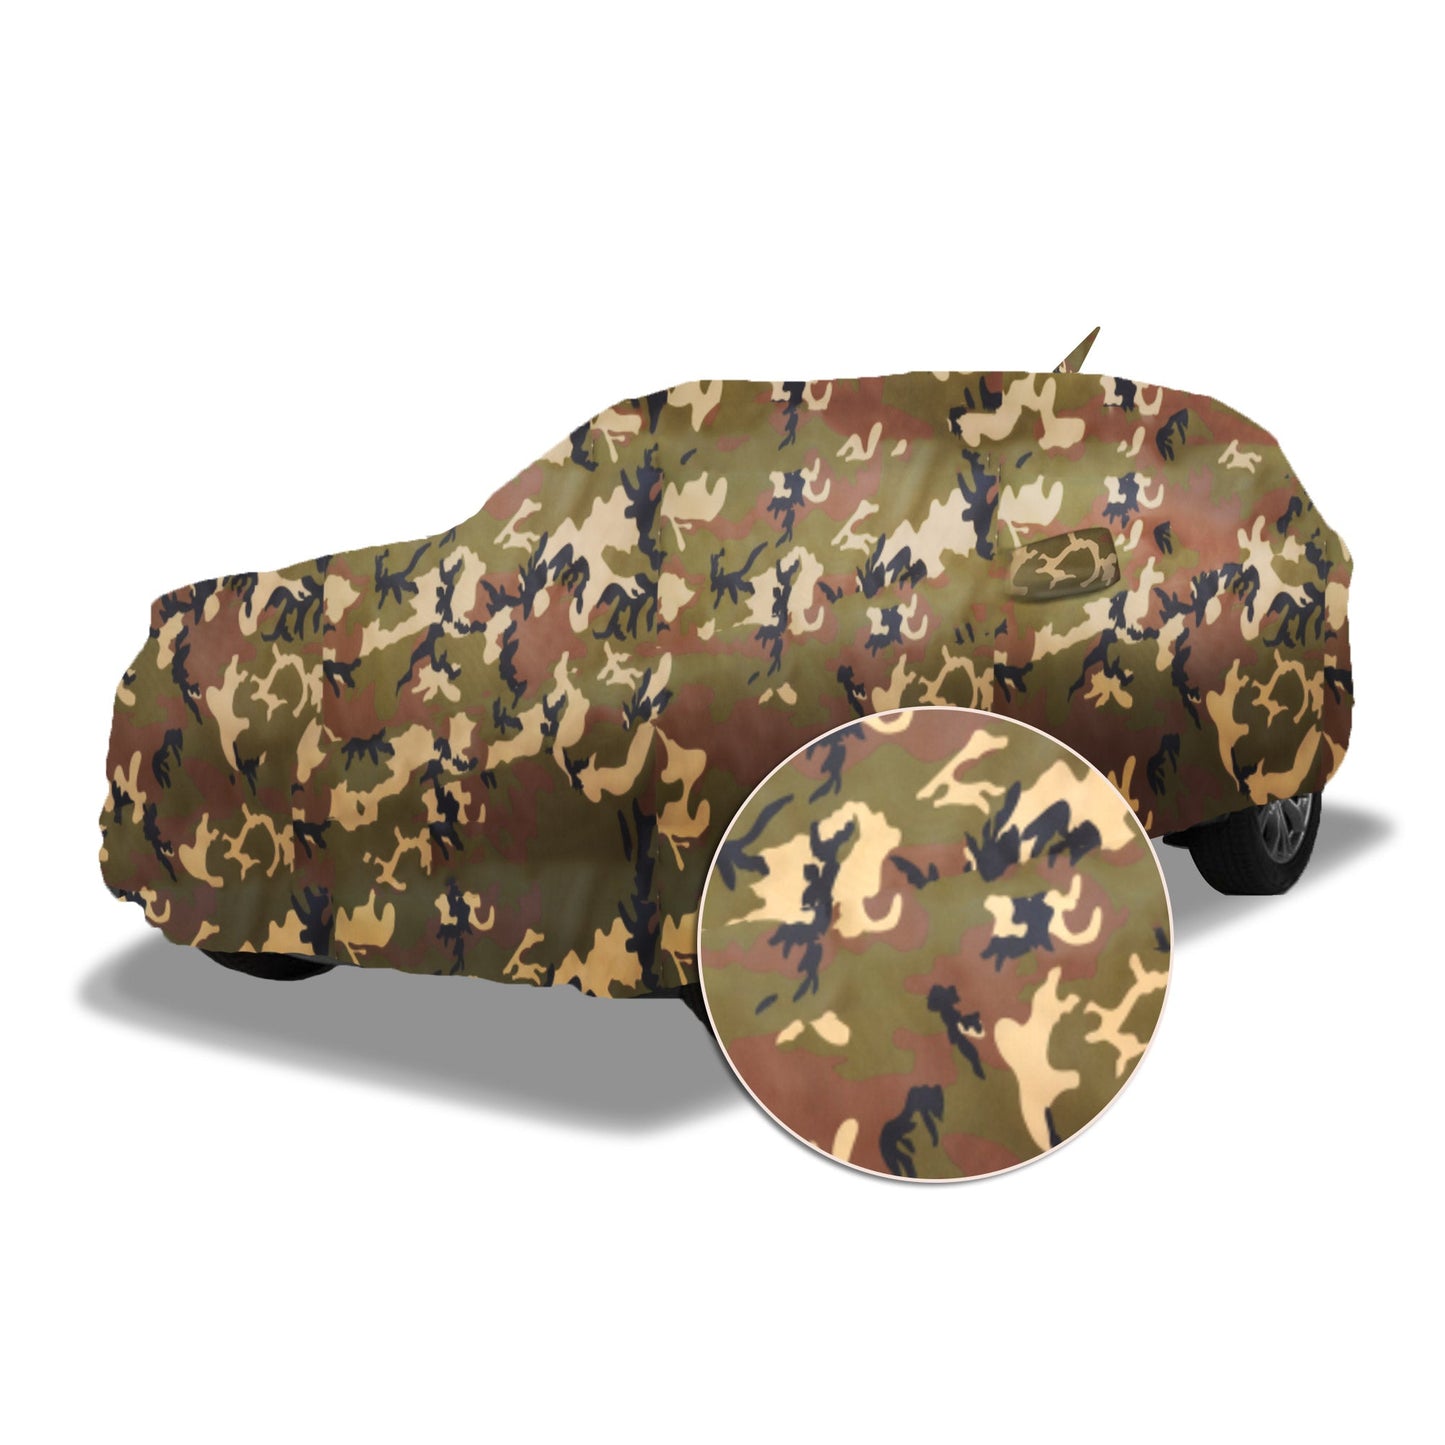 Ascot Volvo XC60 Car Body Cover Extra Strong & Dust Proof Jungle Military Car Cover with UV Proof & Water-Resistant Coating